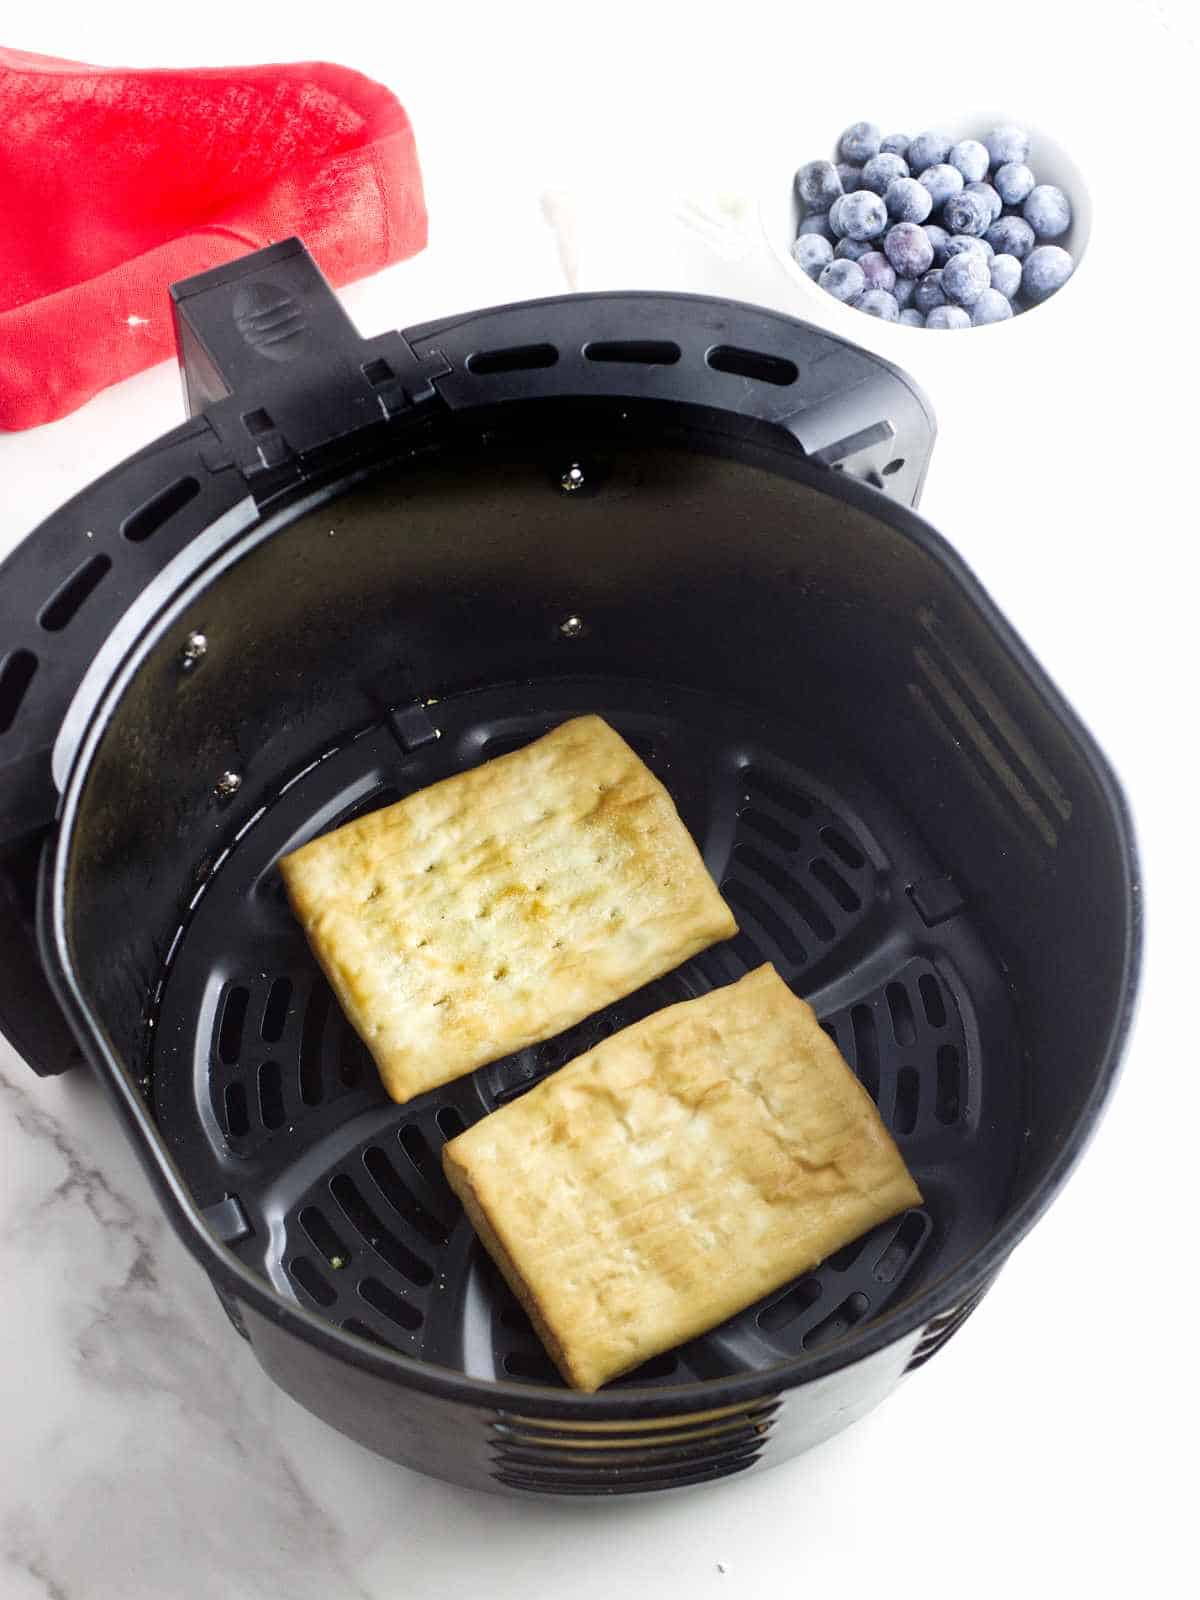 two rectangular pastries in an air frying basket.